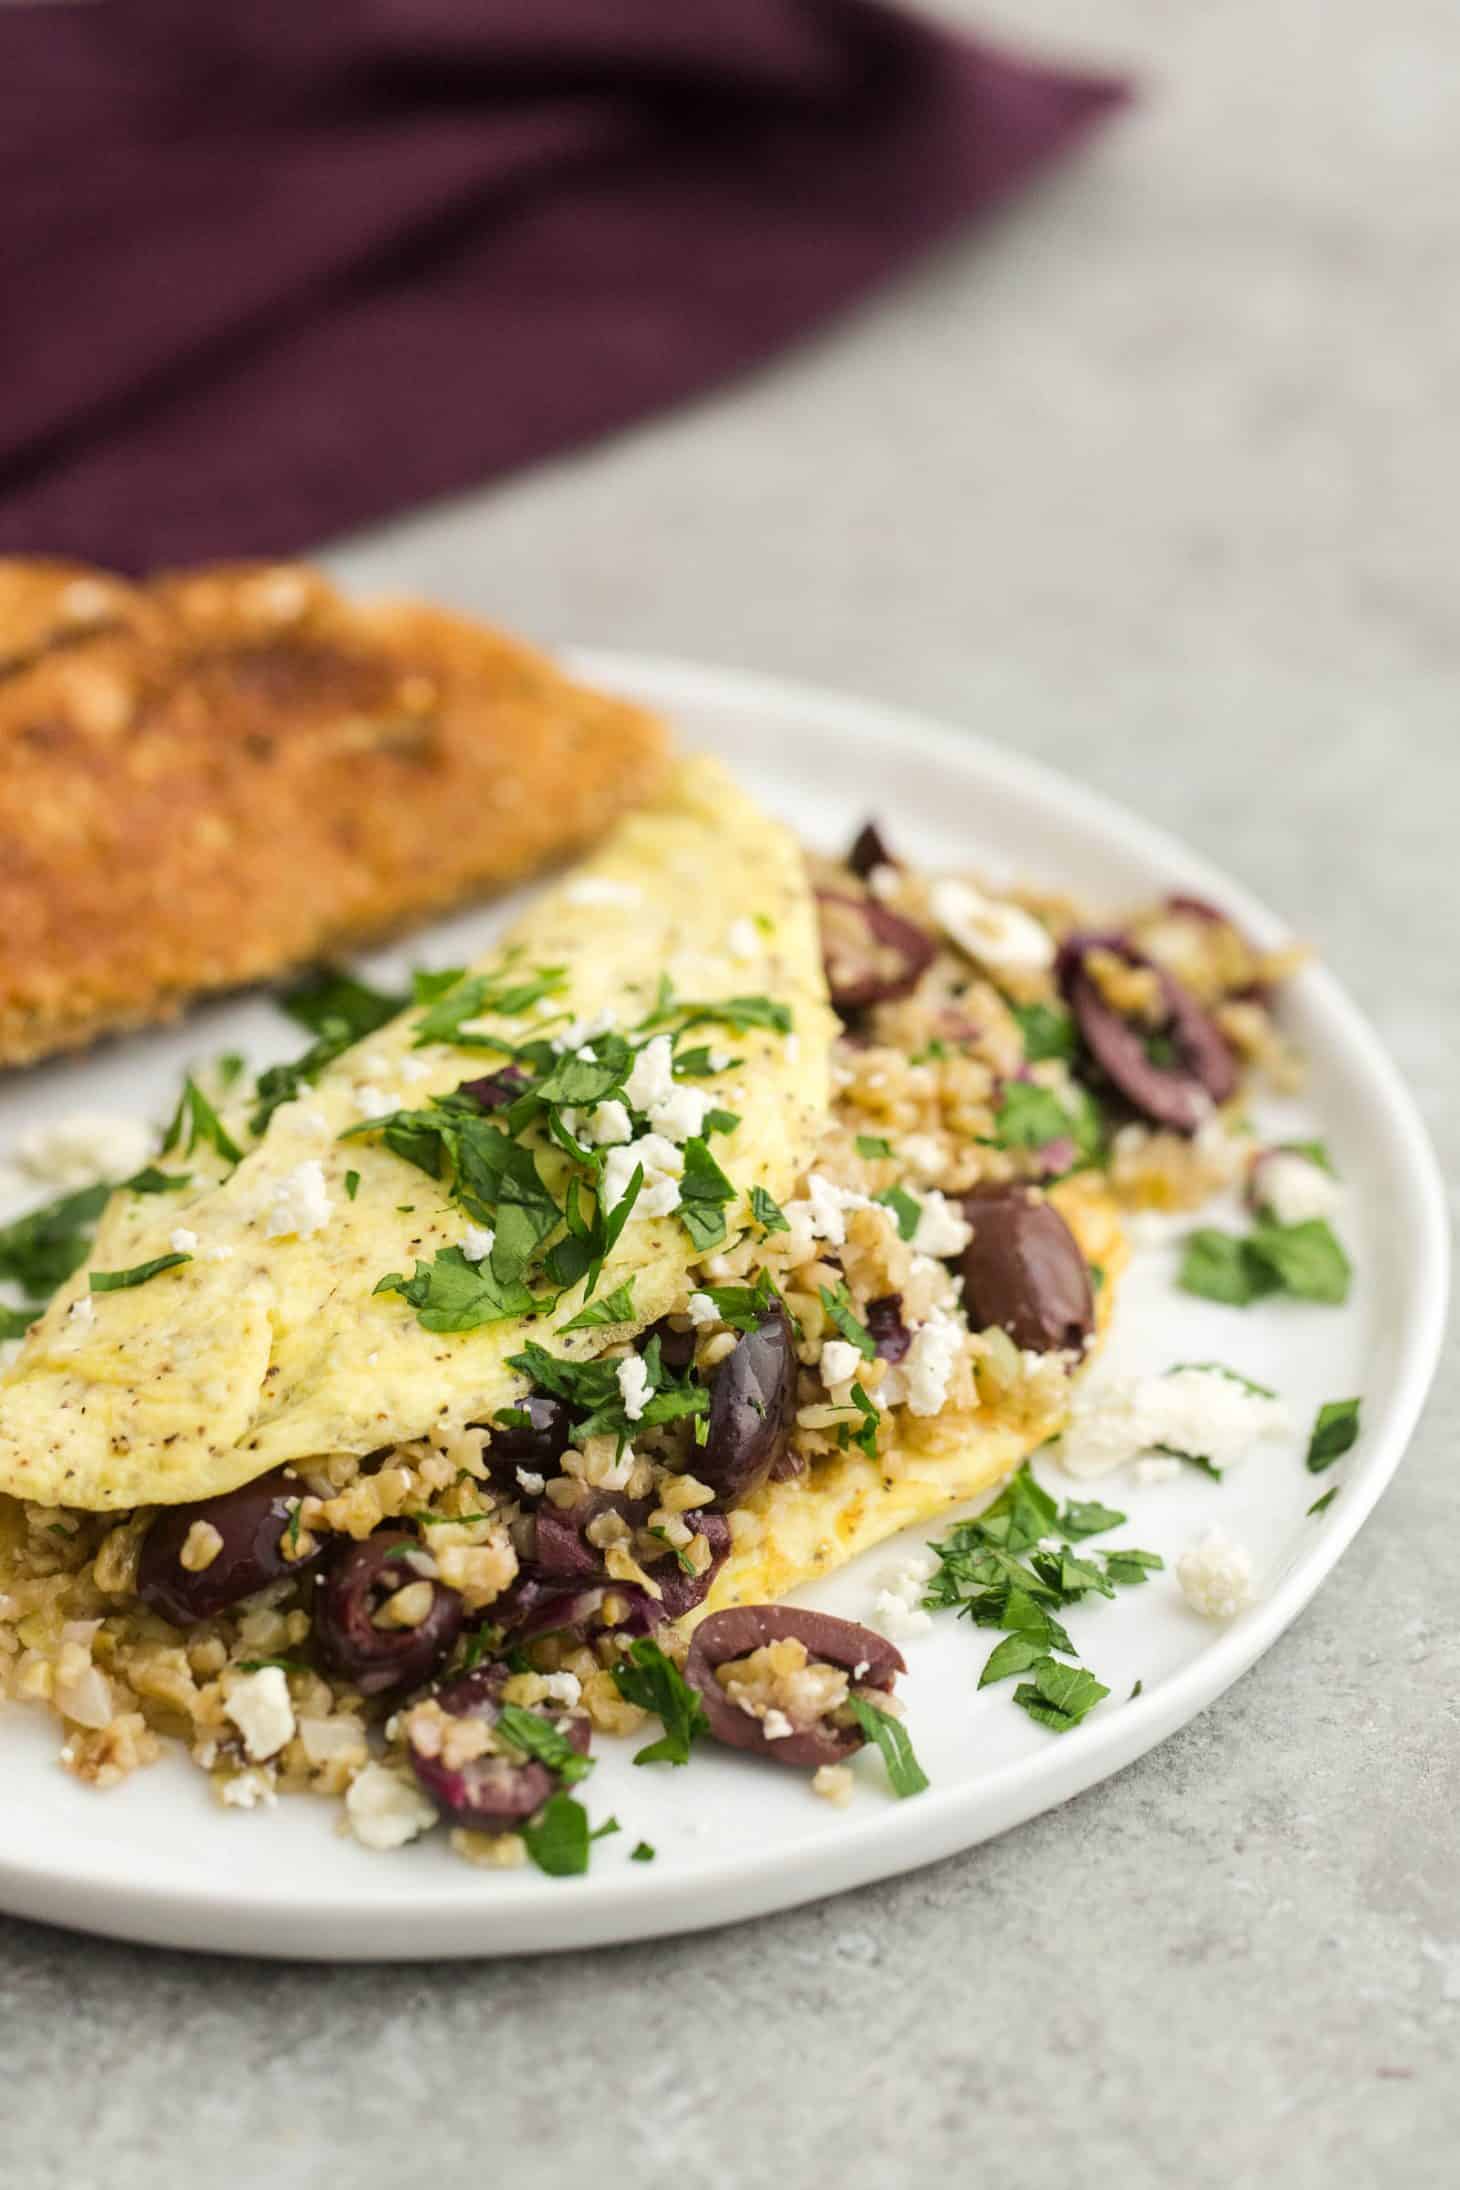 Freekeh Omelette with Olives and Feta